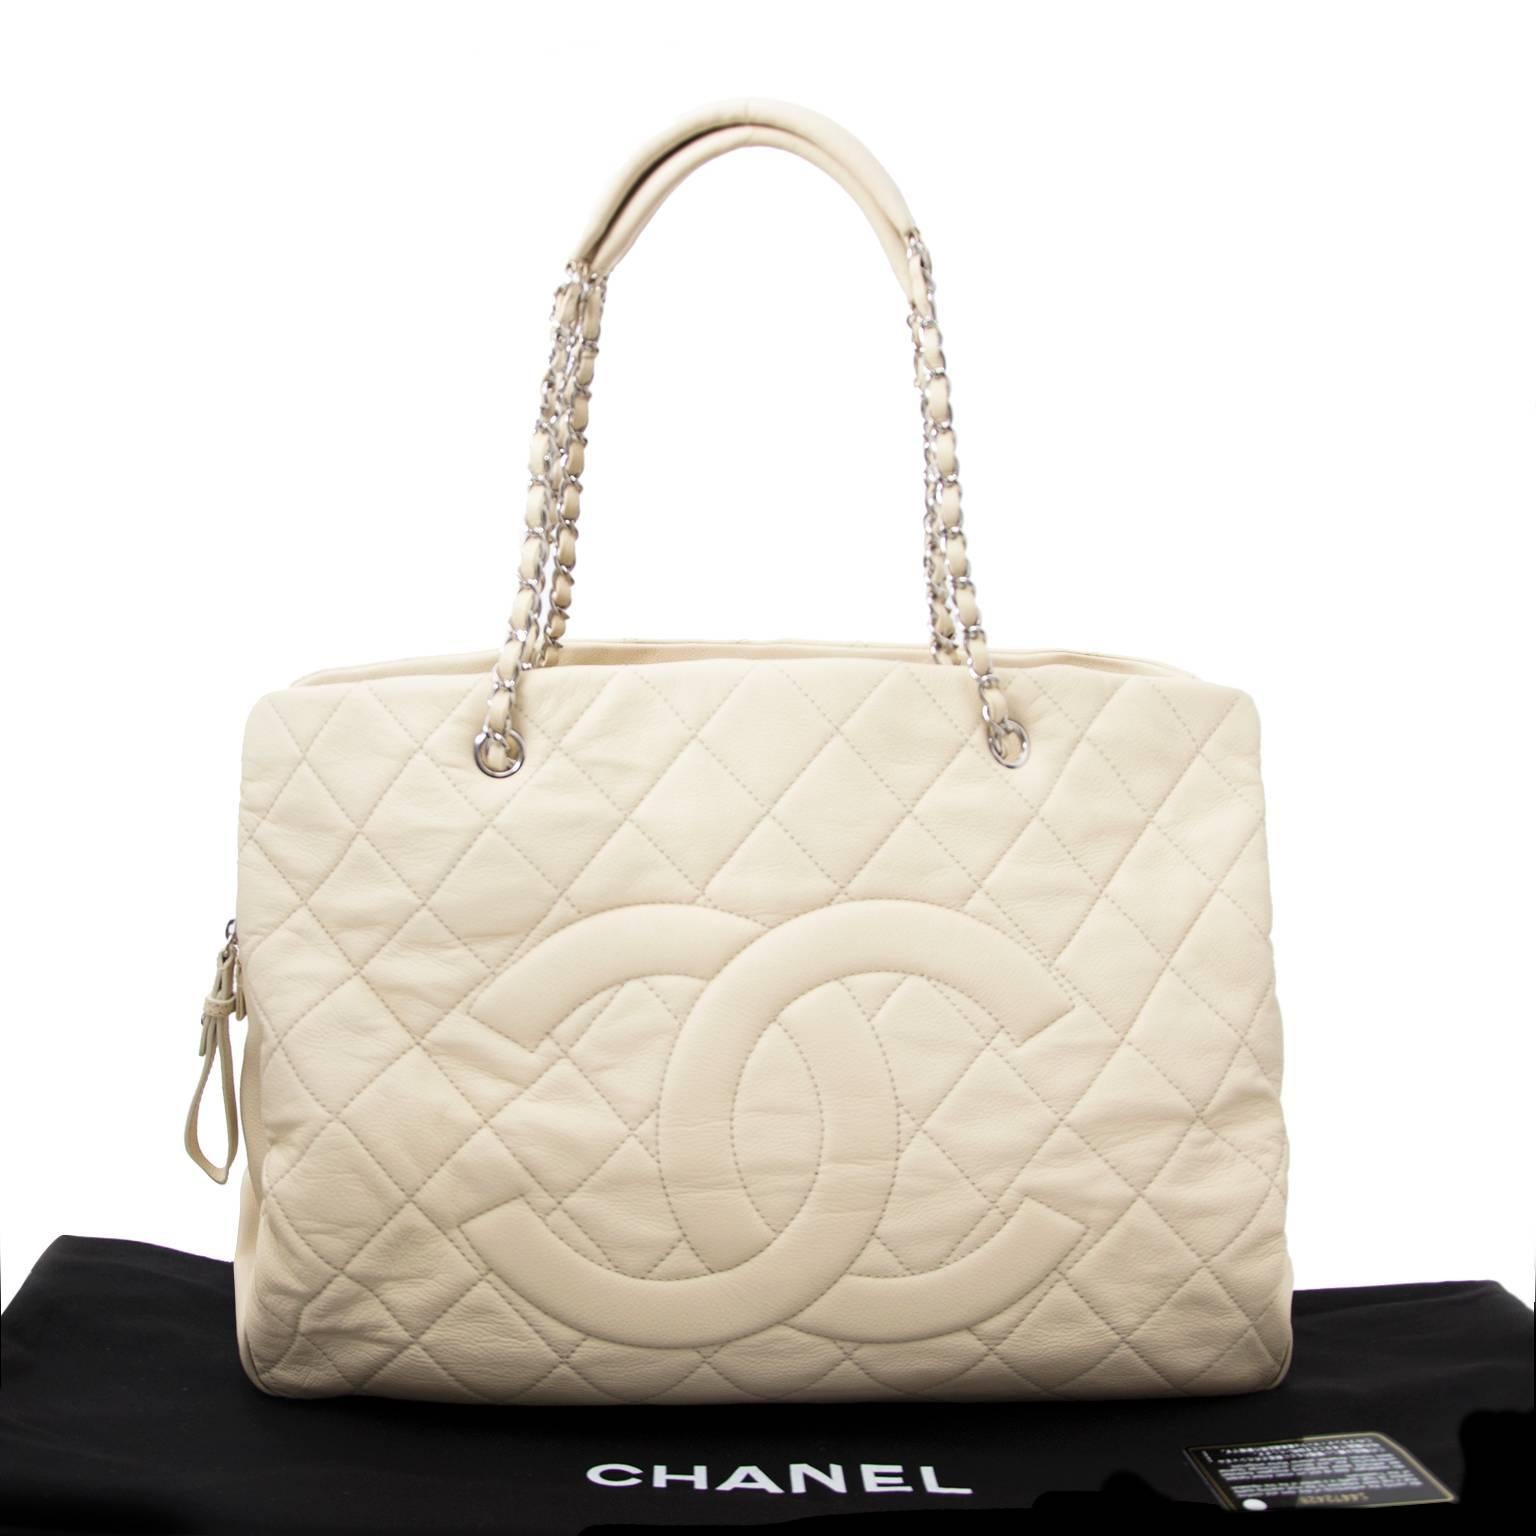 A Chanel tote is a must-have piece in every Chanel lovers closet.
This white leather can be worn on the shoulders with the silver-tone chain straps.
Perfect to for a classy office look as it has room for all work essentials.
Inside, the bag contains